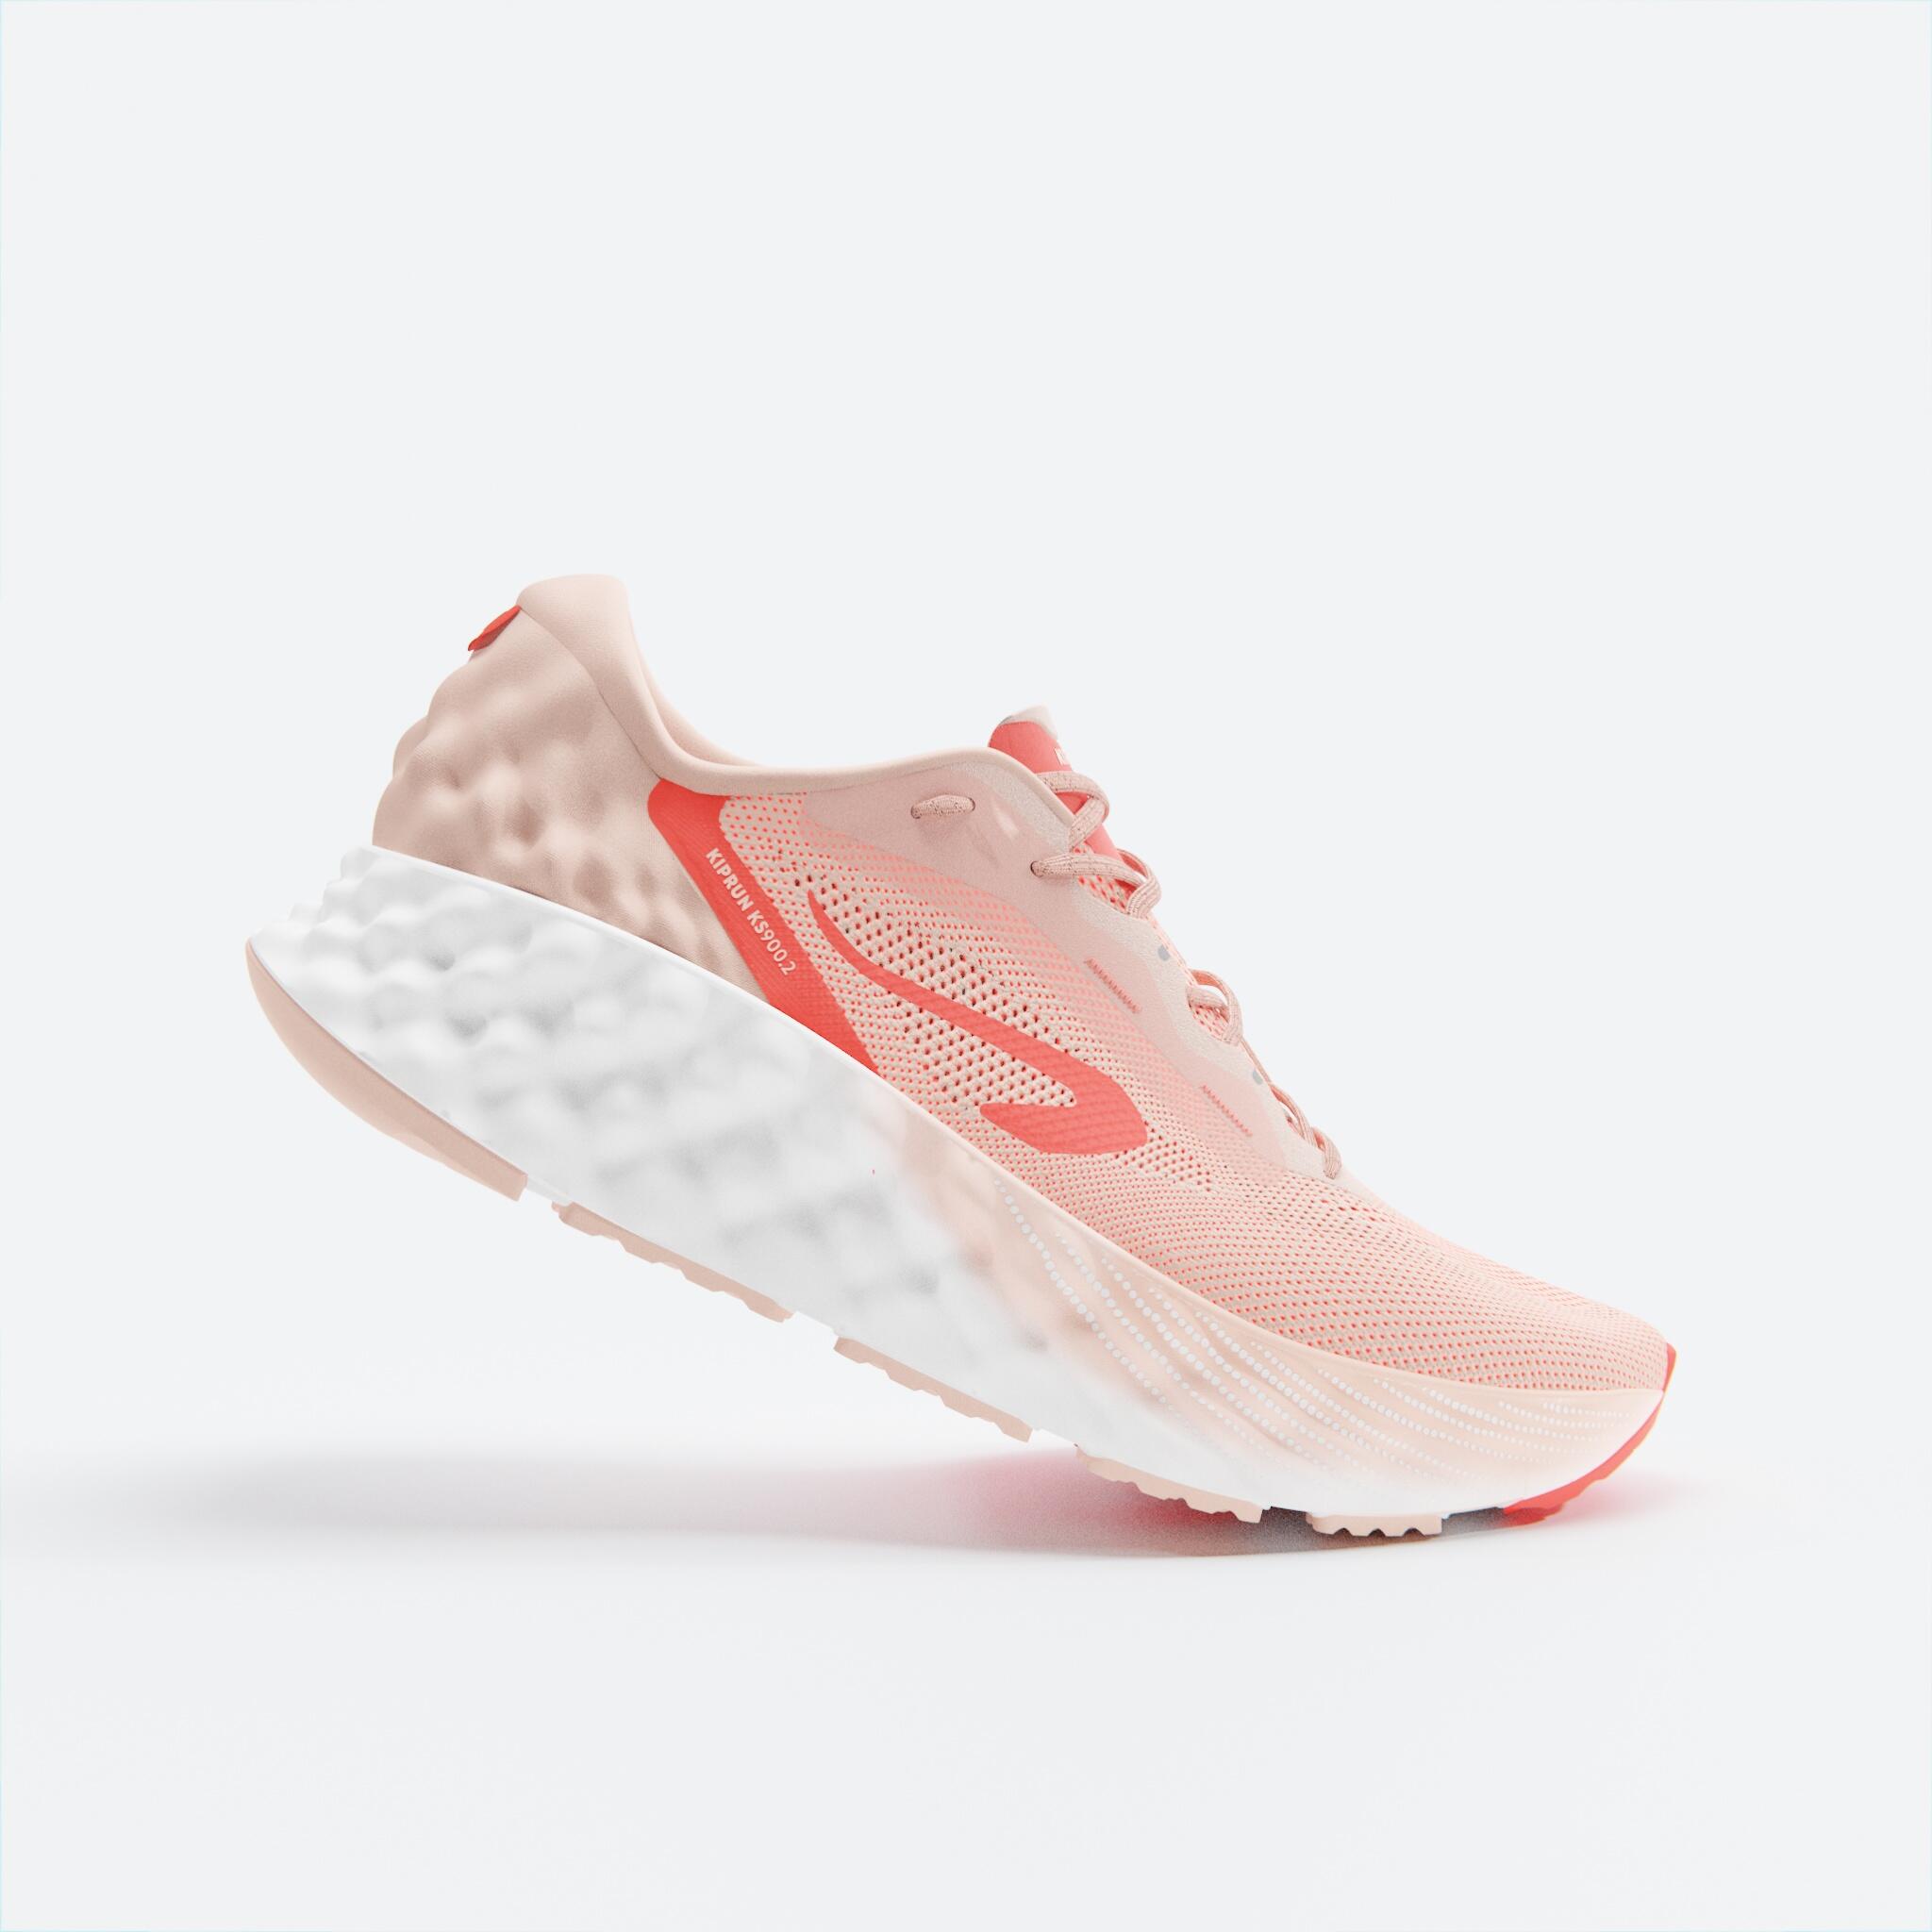 fluo pale pink / fluo coral pink